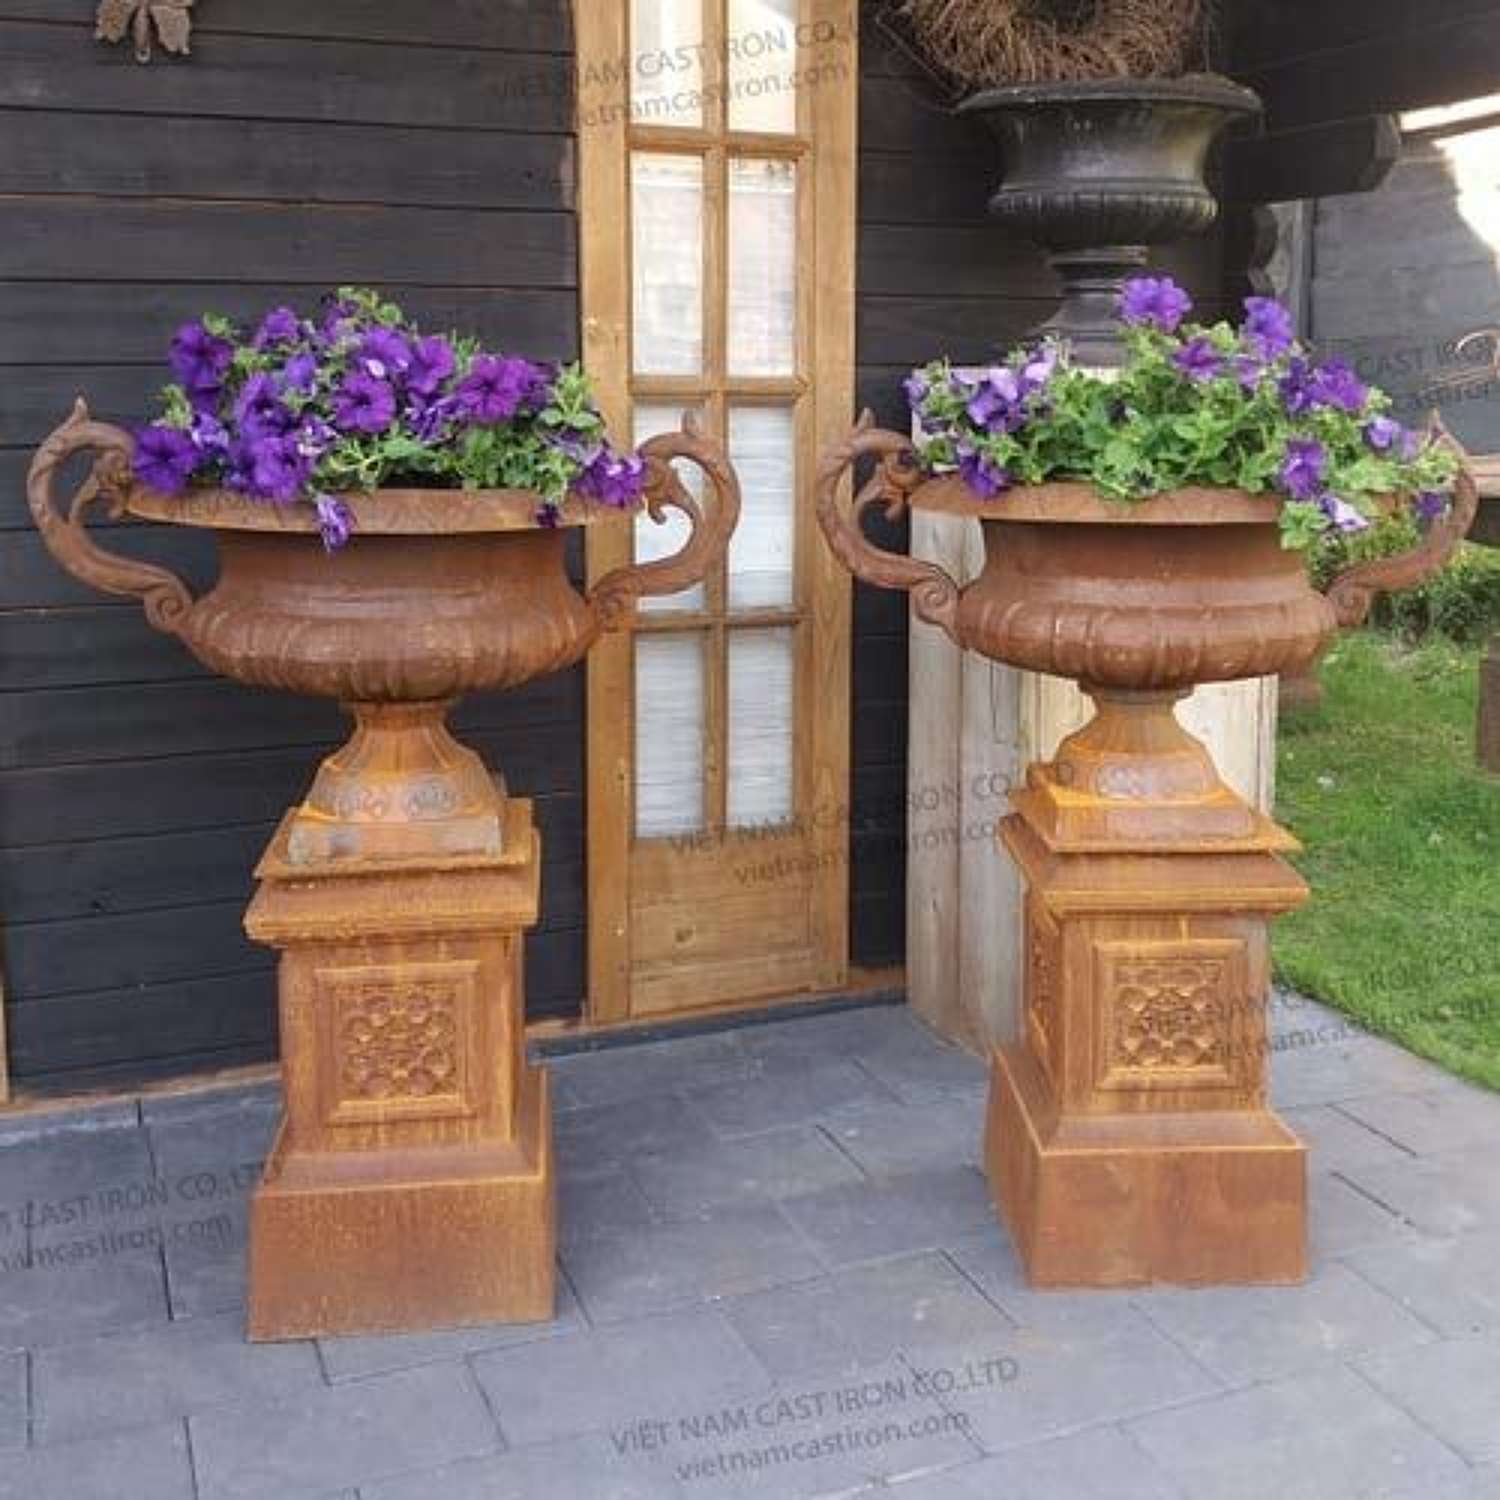 Pair of Cast Iron Urns and plinths - cast iron planters